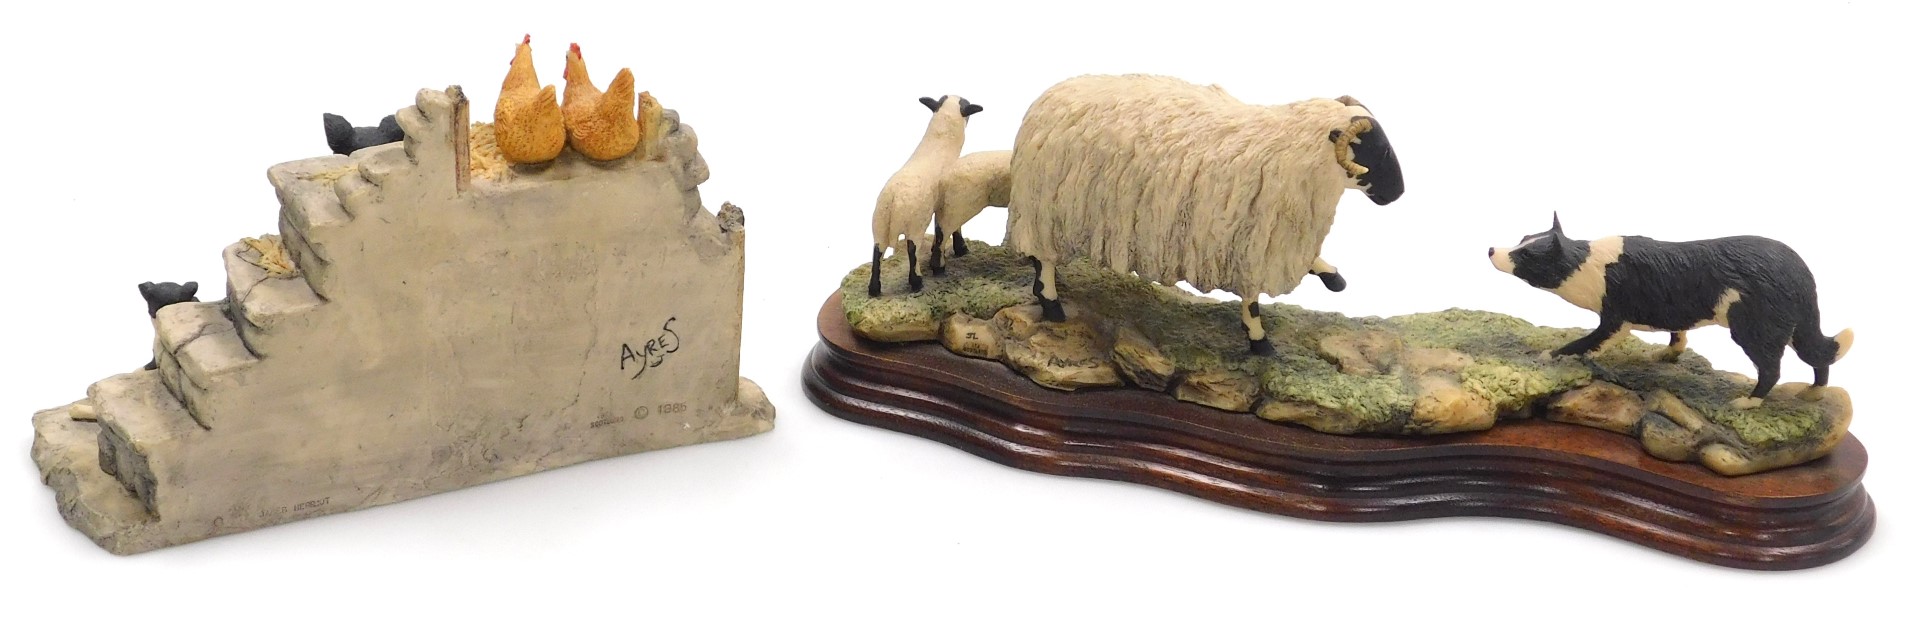 A Border Fine Arts sculpture of a sheep dog and sheep, designed by Ayres, raised on a wooden base, 2 - Image 2 of 4